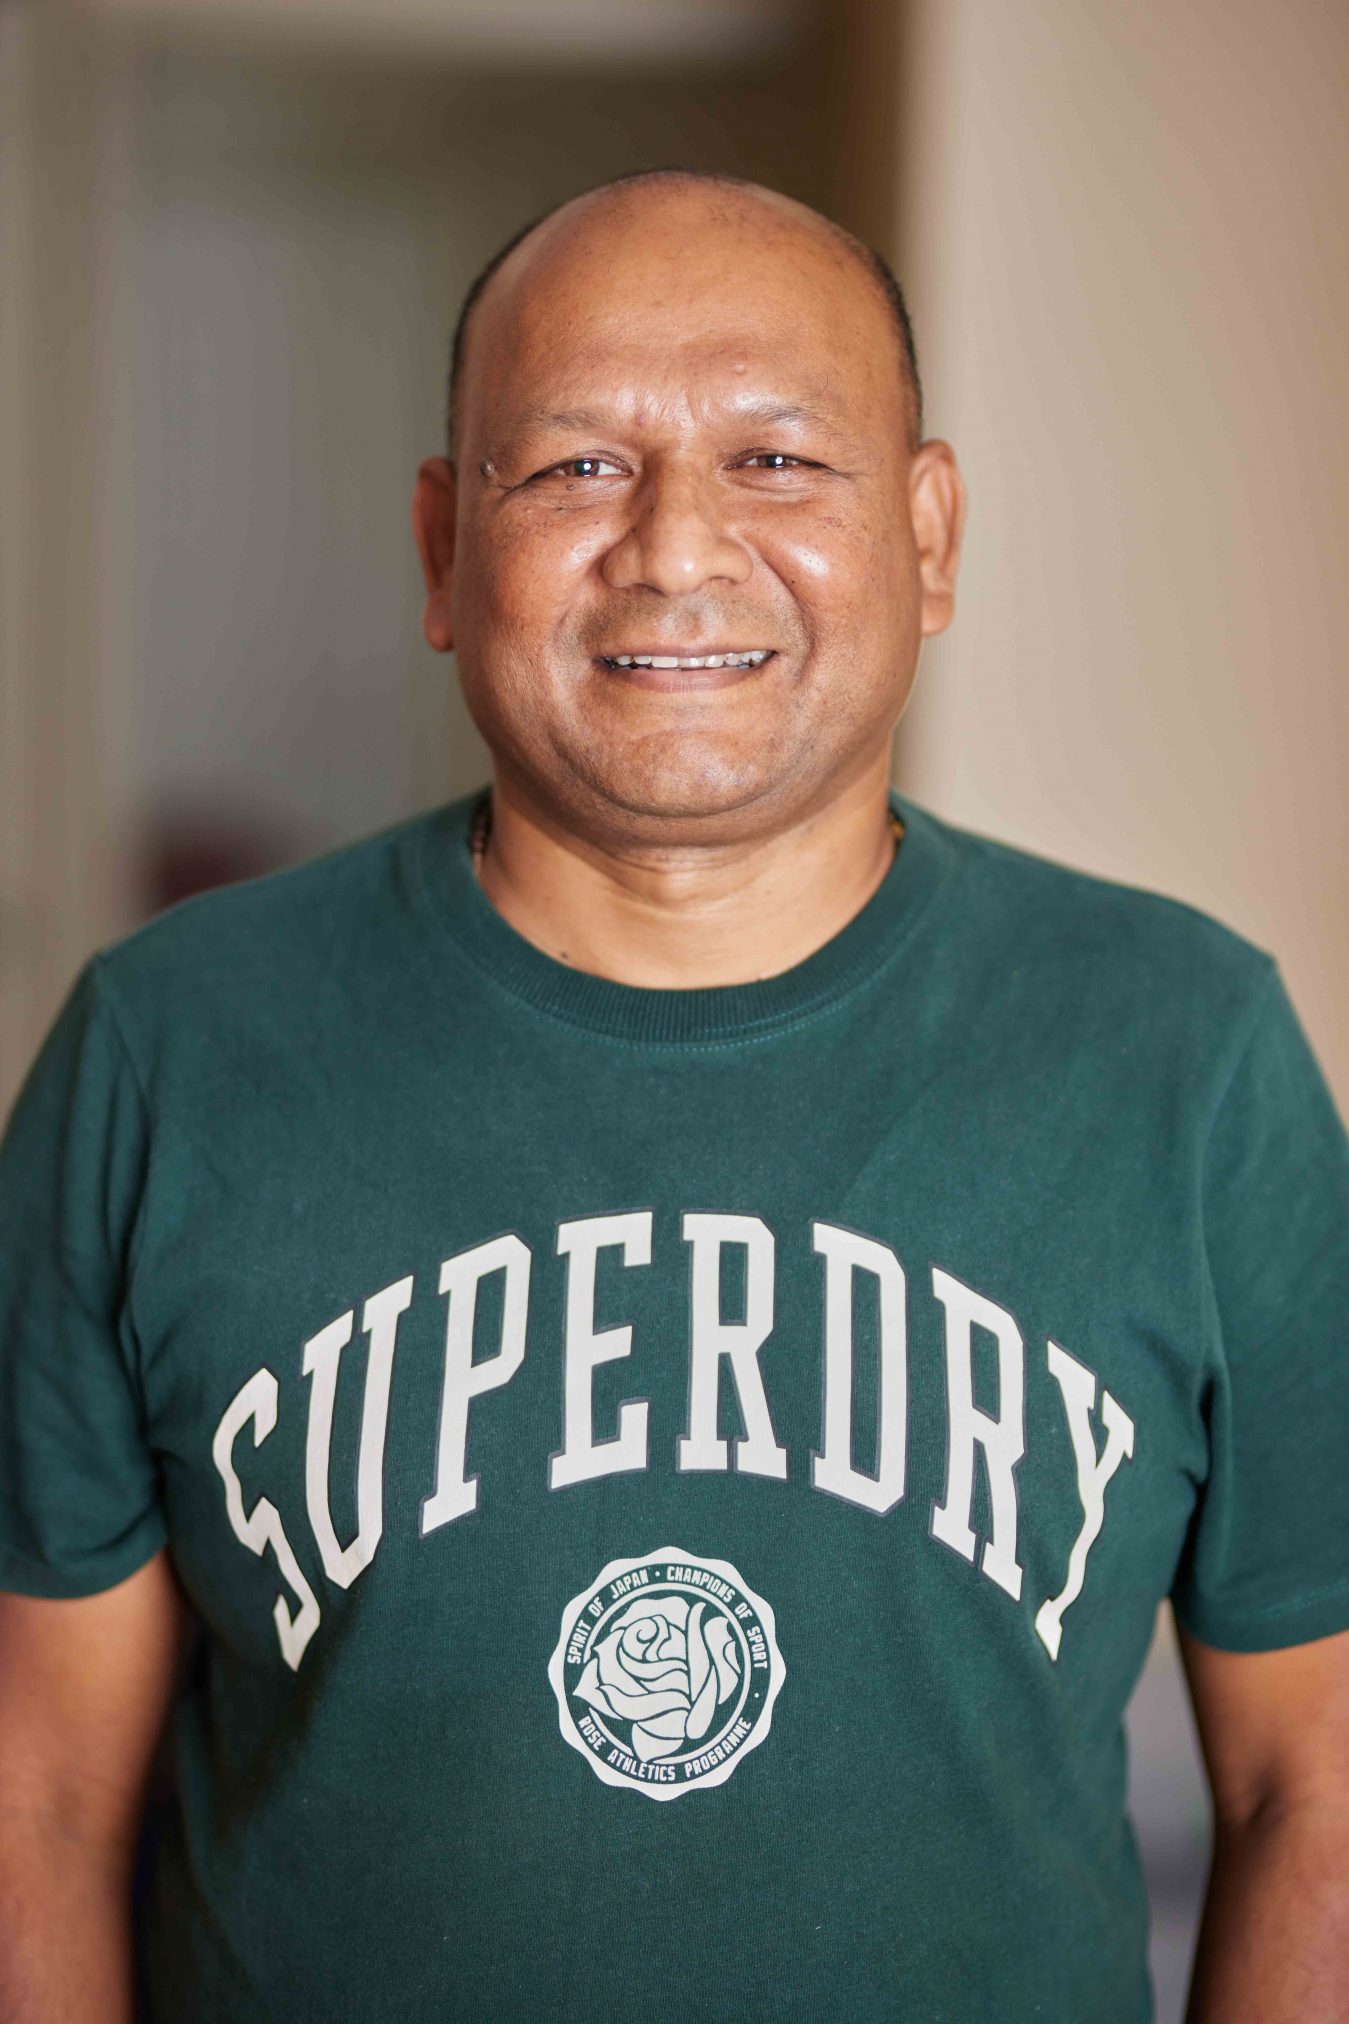 A man in a green t-shirt smiling at the camera.